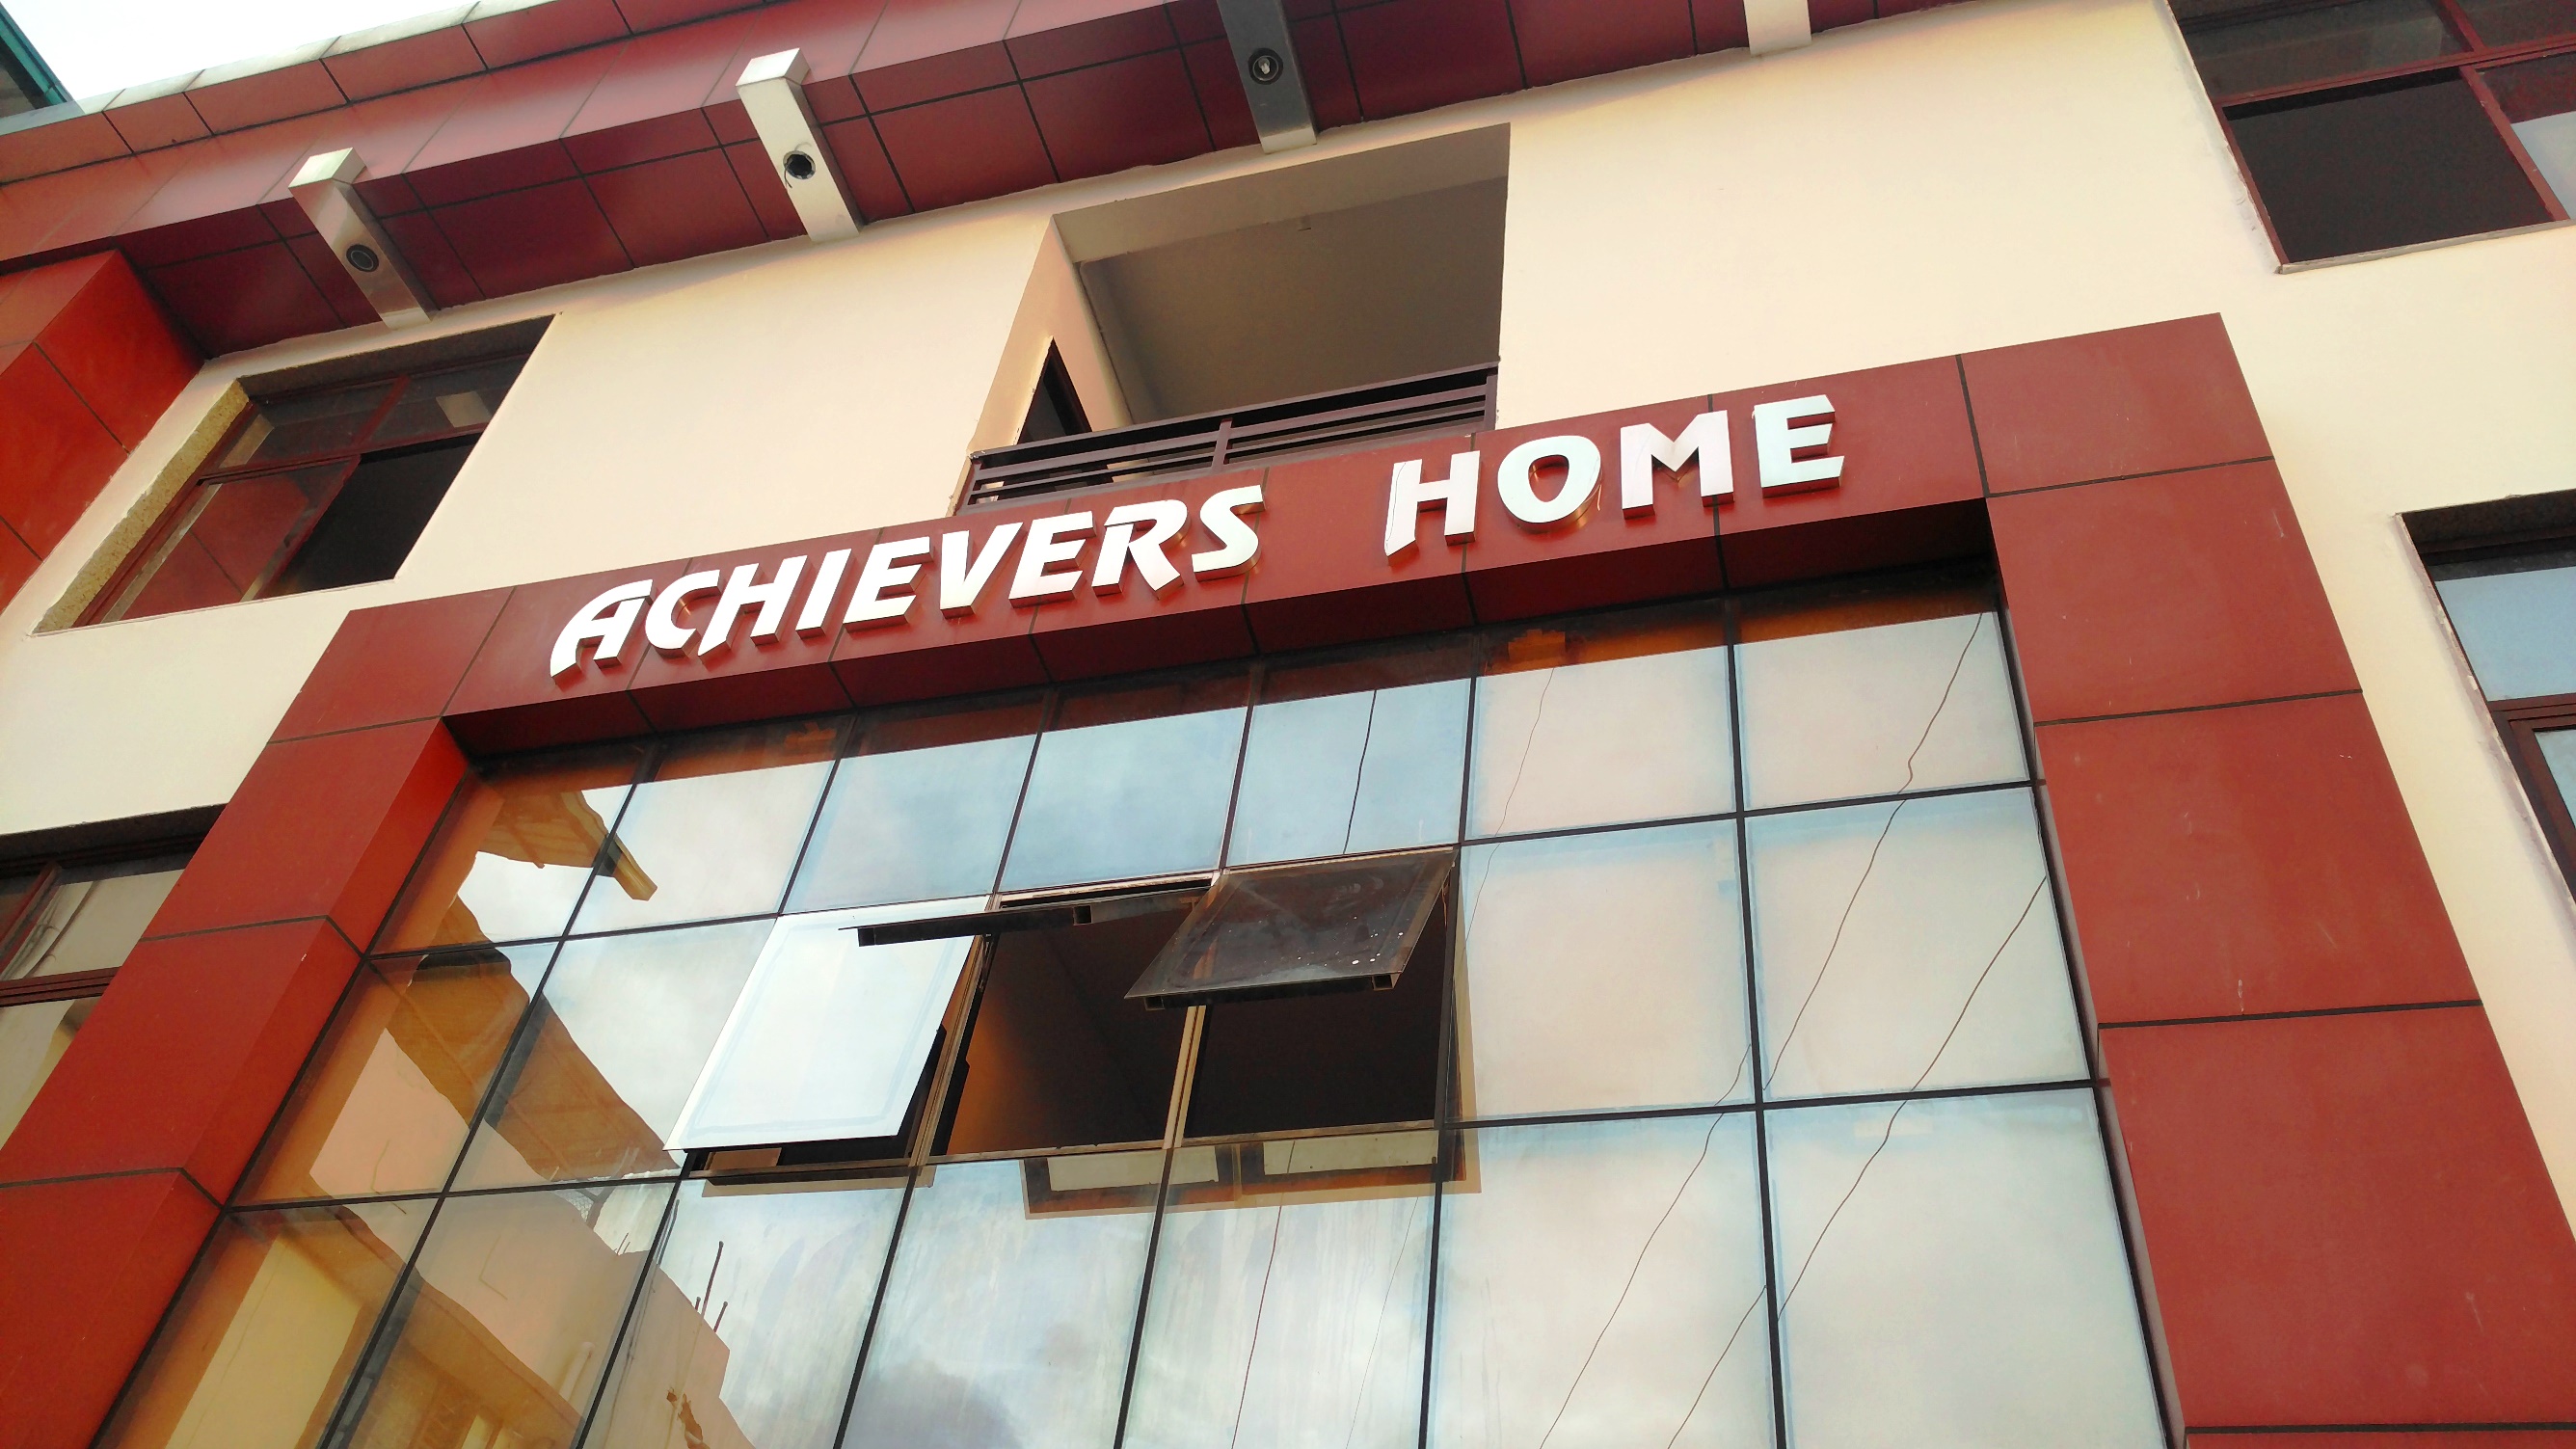 Achievers Home Boys Hostel, upes hostel fees,hostel fee of upes, hostels near upes dehradun, hostels in dehradun near upes, 
upes dehradun hostel fee structure
